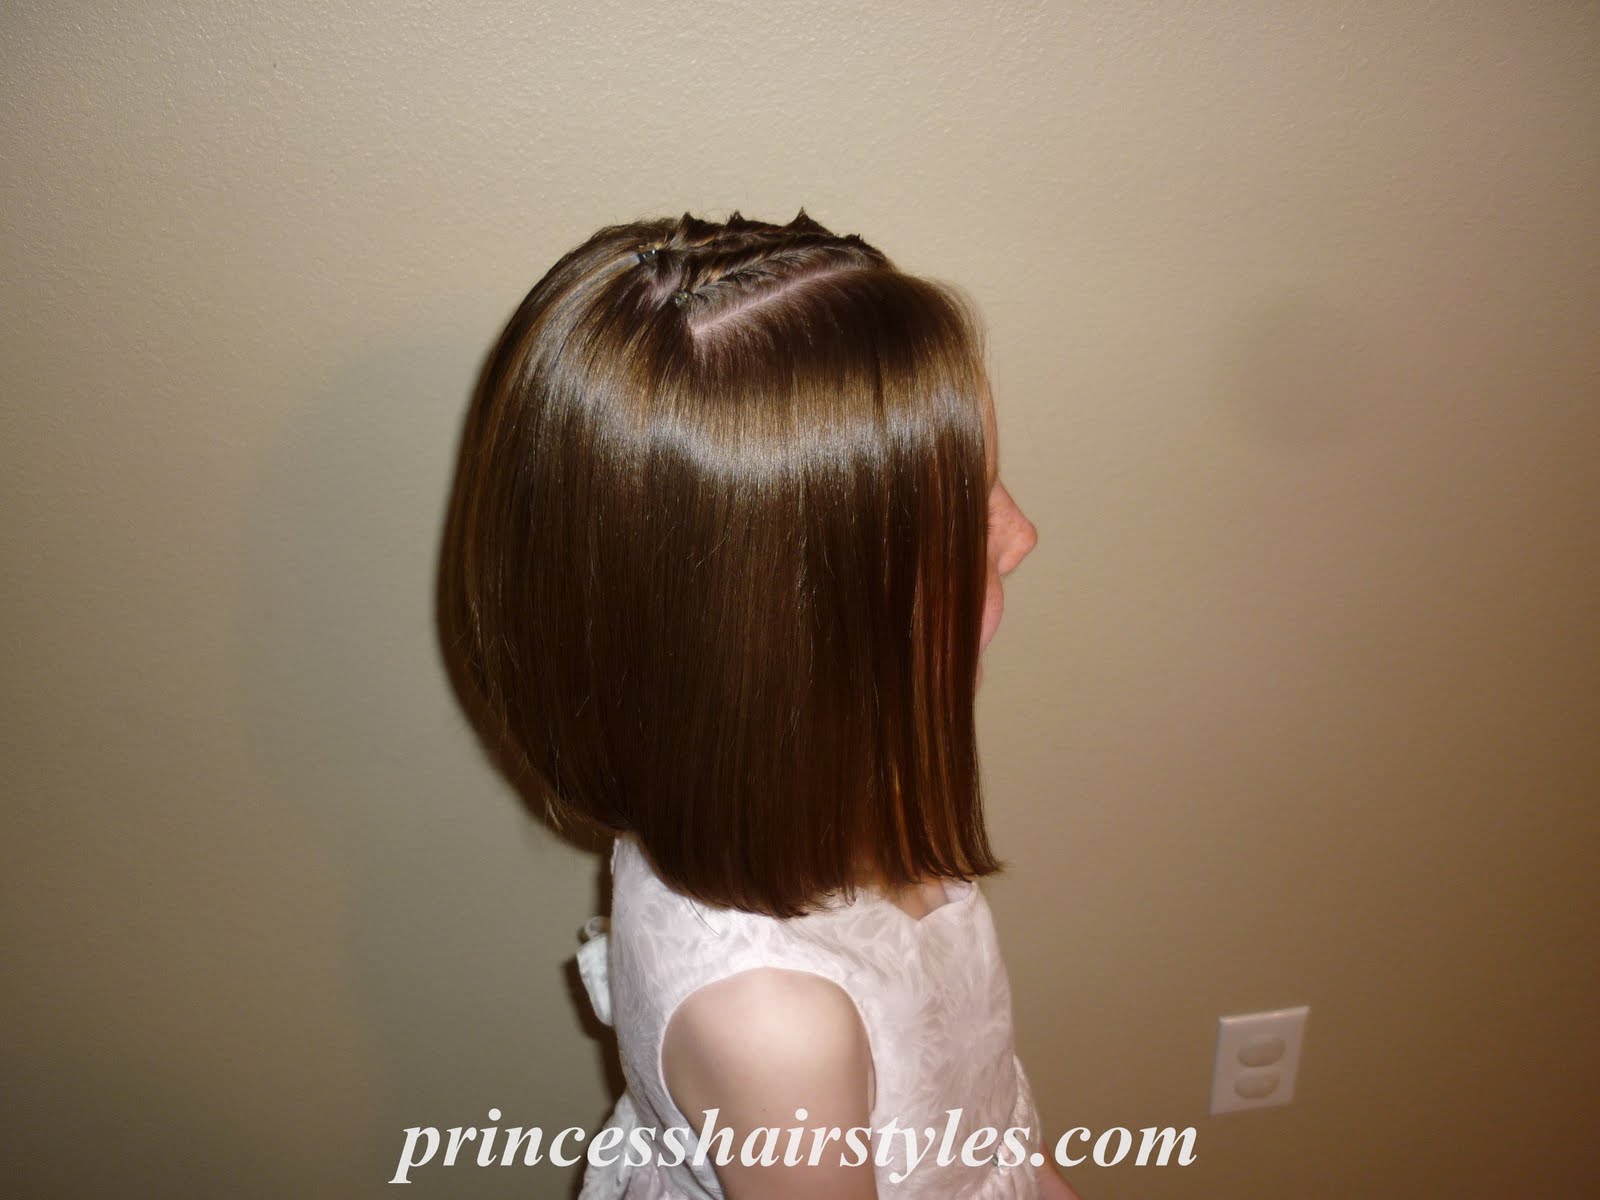 Easy Princess Hairstyles For Short Hair